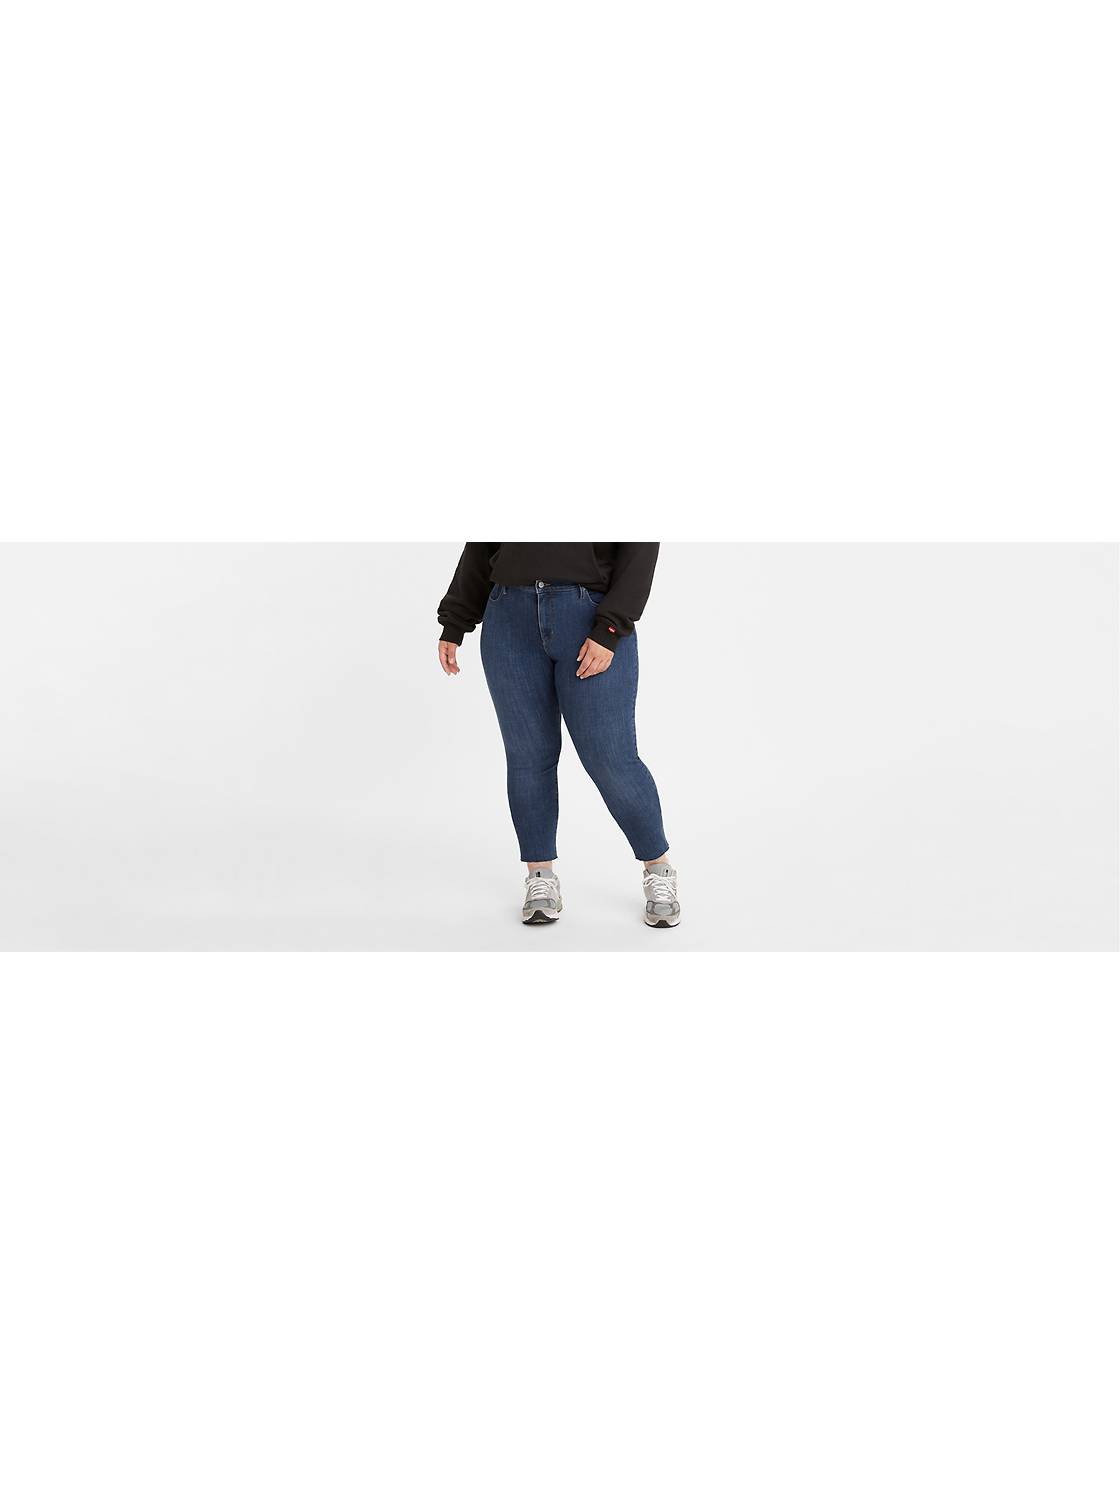 Women's Clothing for Sale - Deals on Clothes | Levi's® US